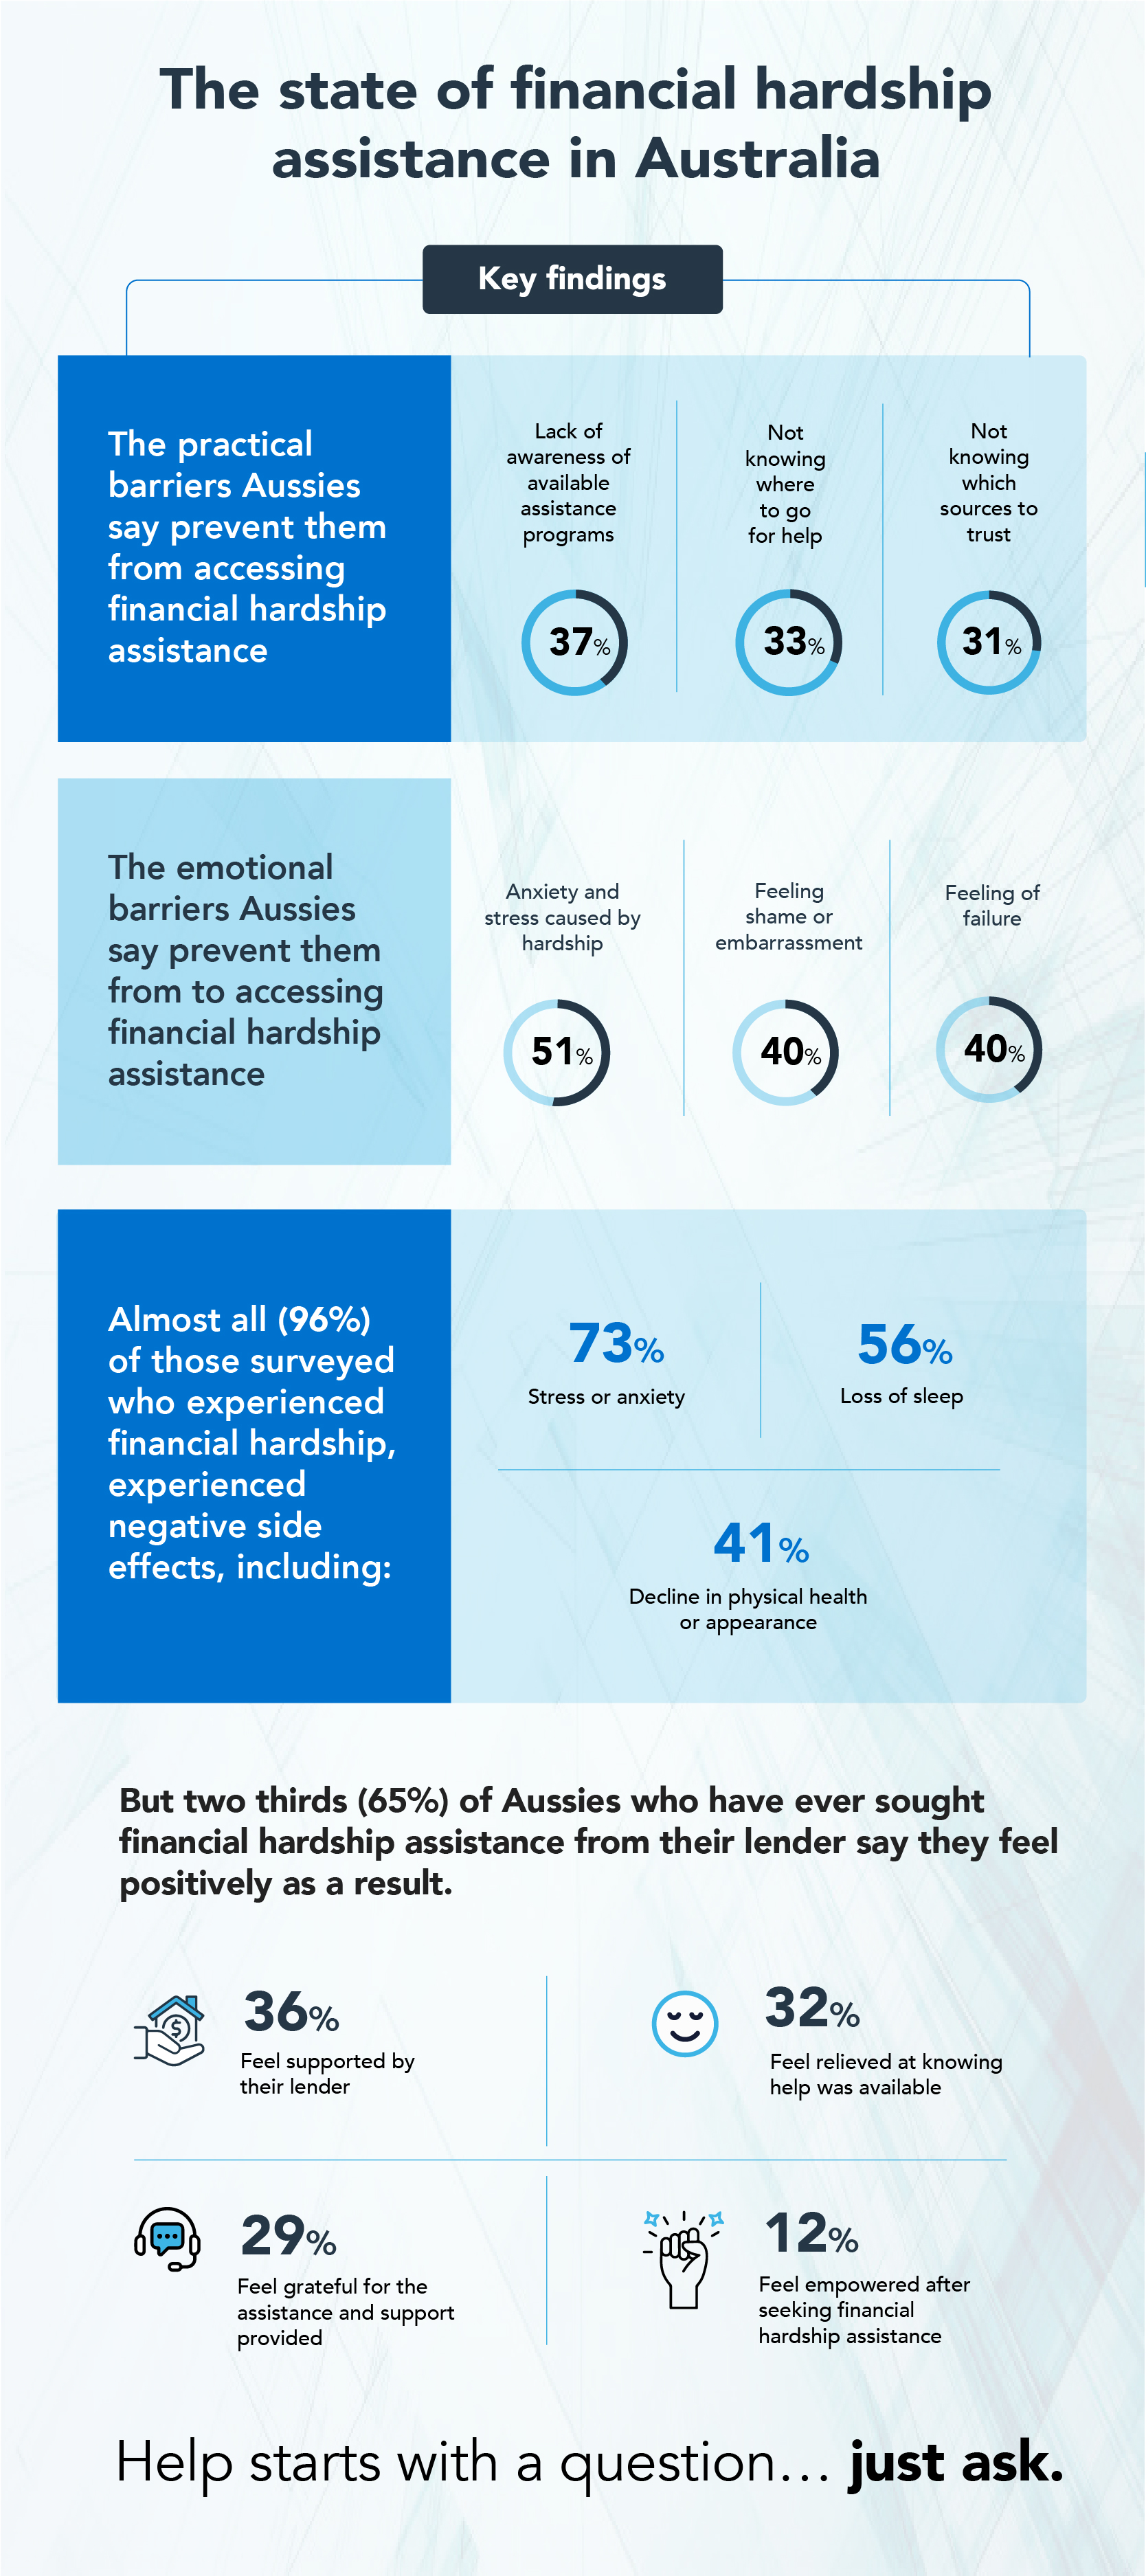 The state of financial hardship assistance in Australia infographic - text version below